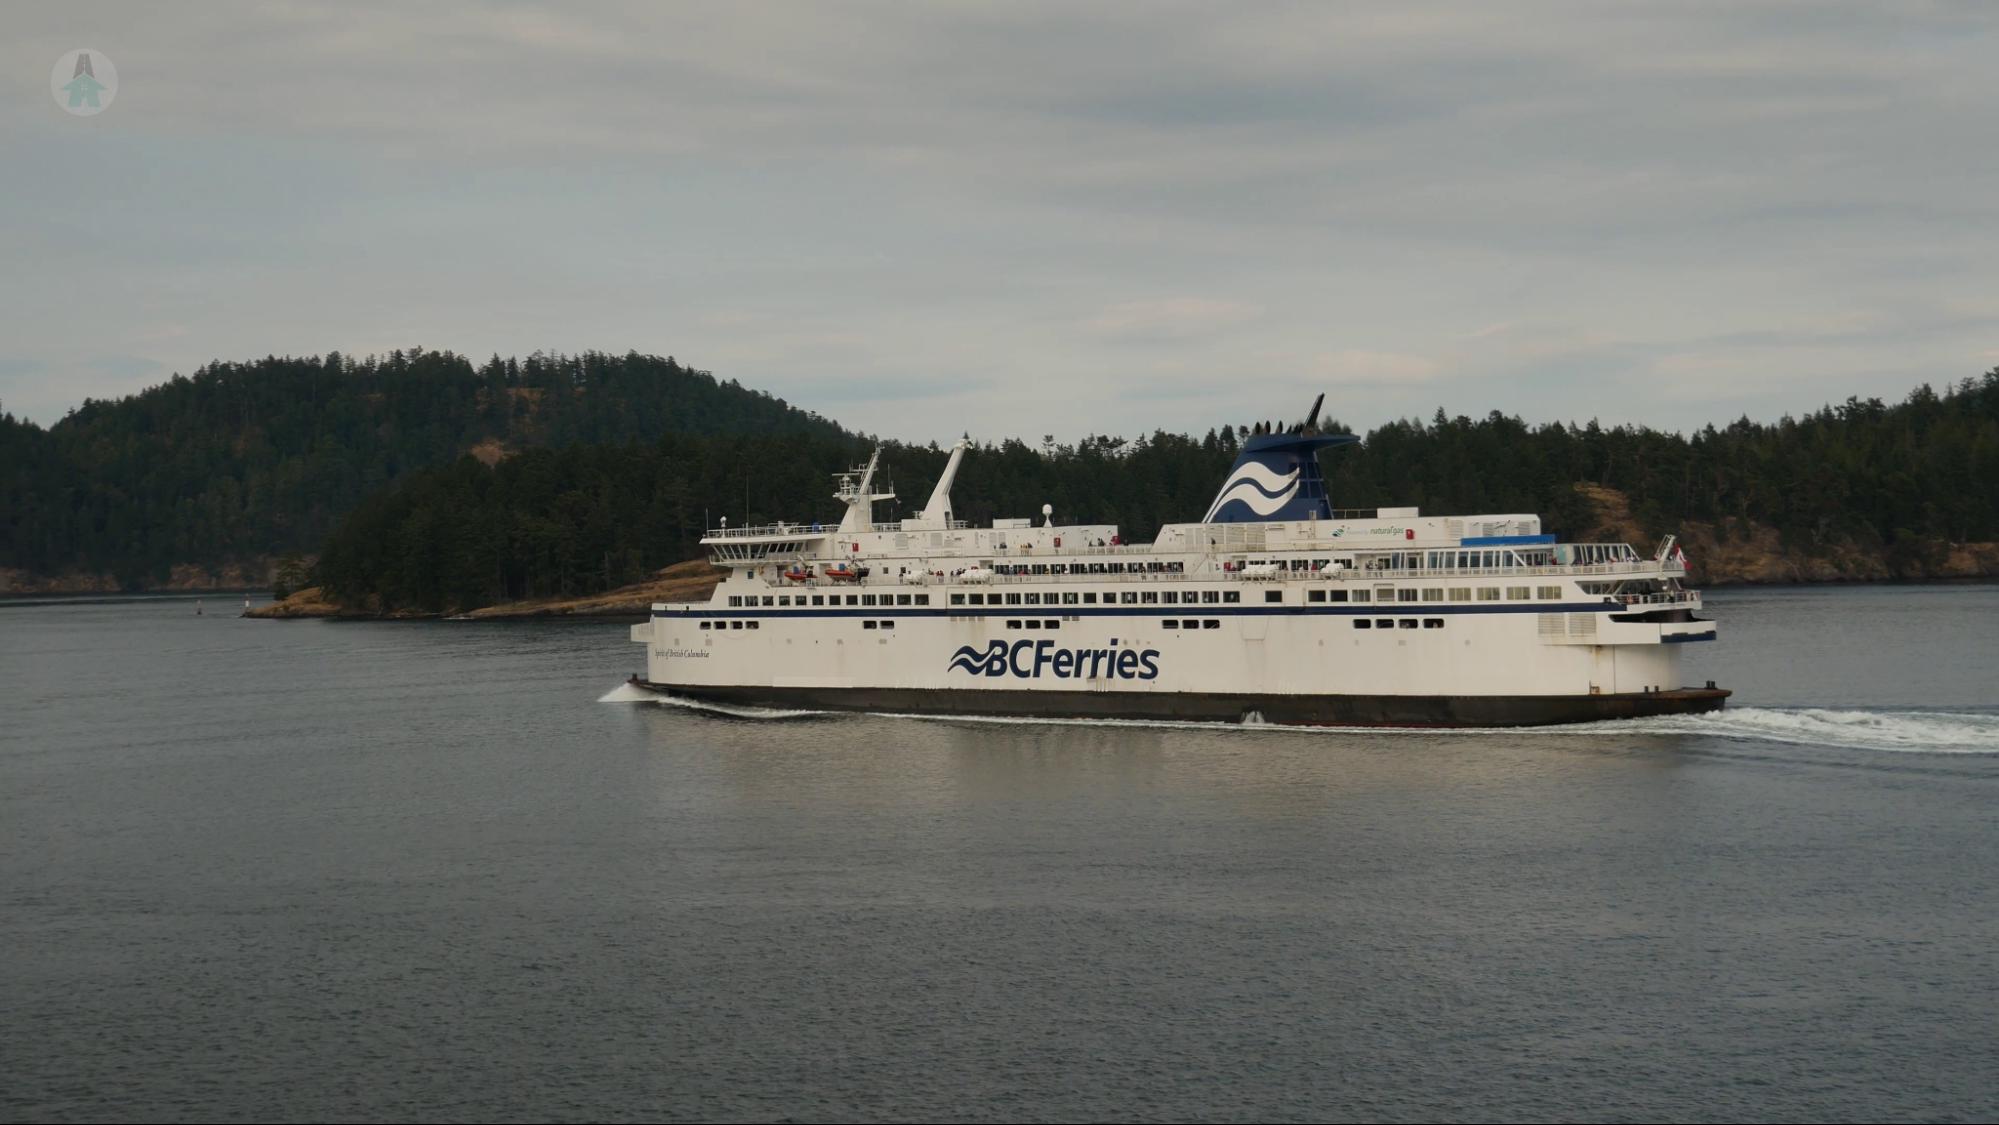 A BC ferry sailing between Vancouver and Vancouver Island. 